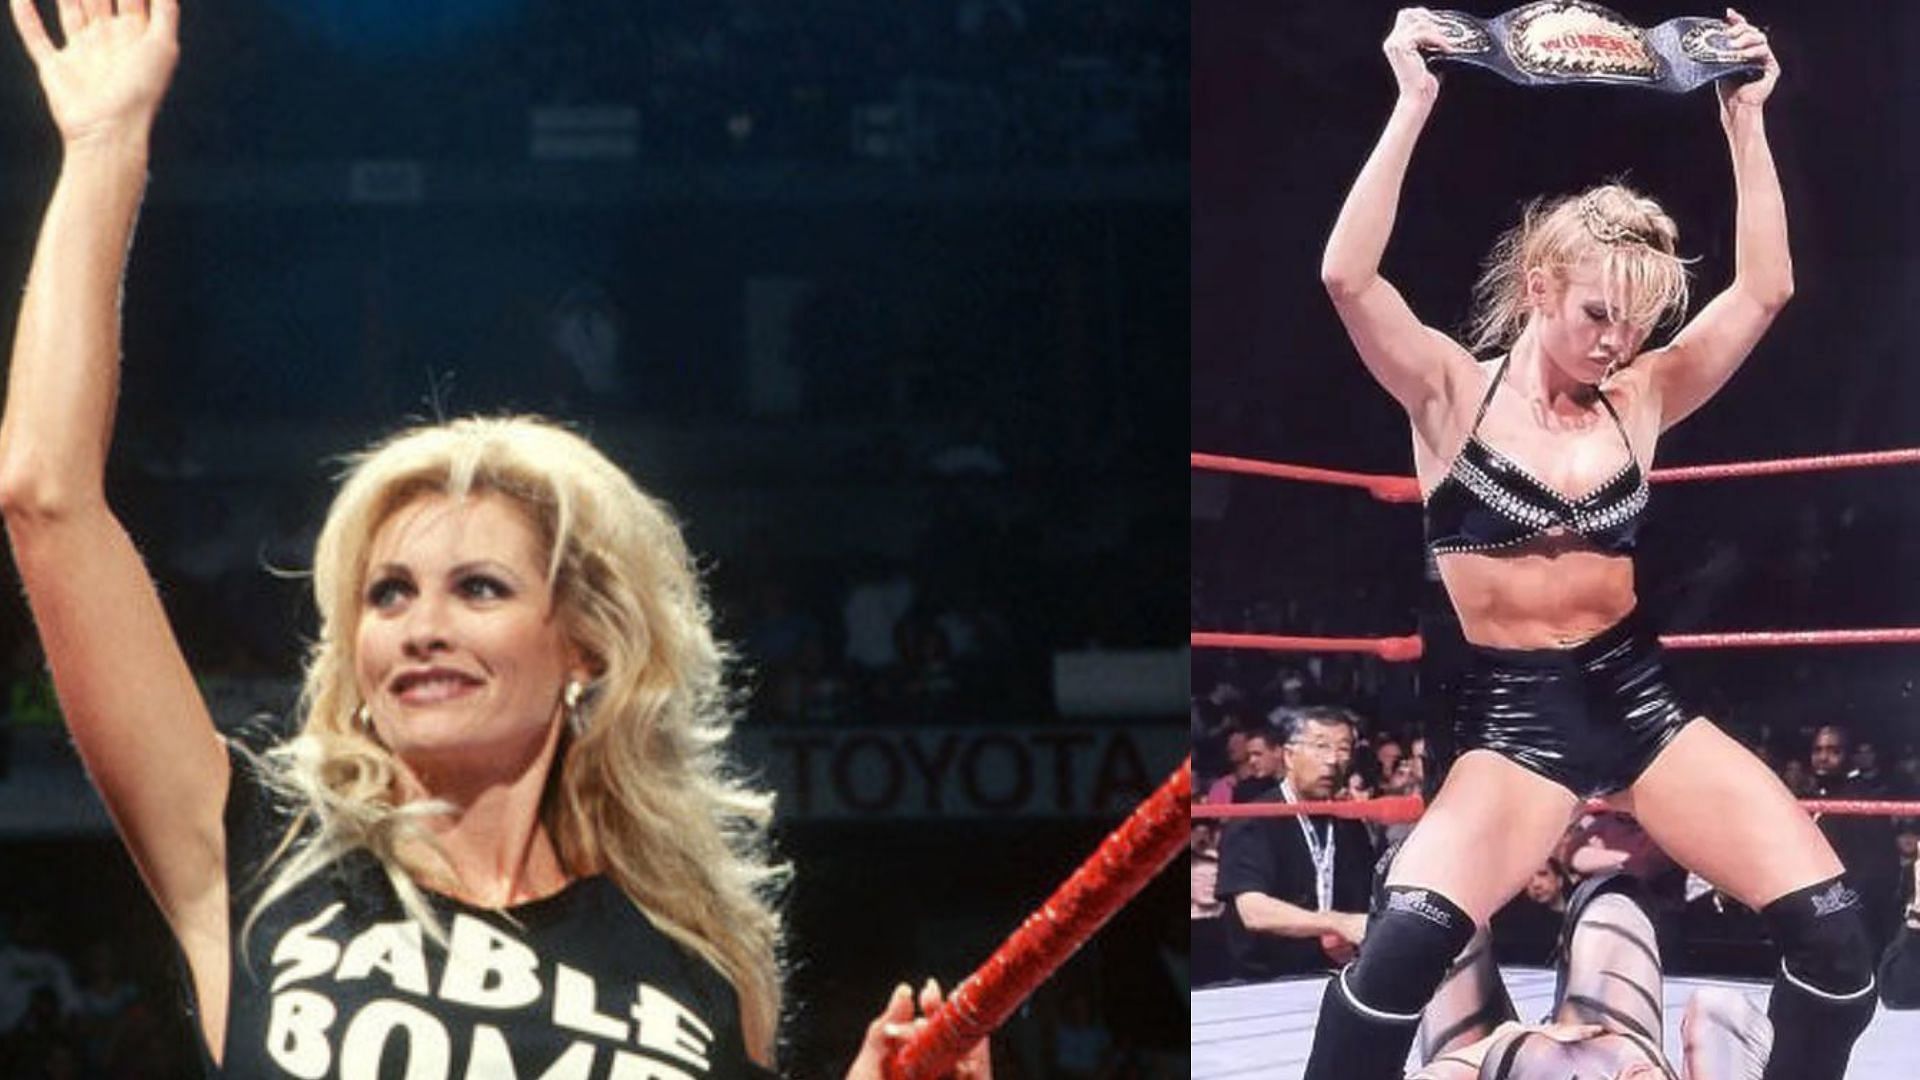 3 Sable moments too hot for WWE TV in 2023